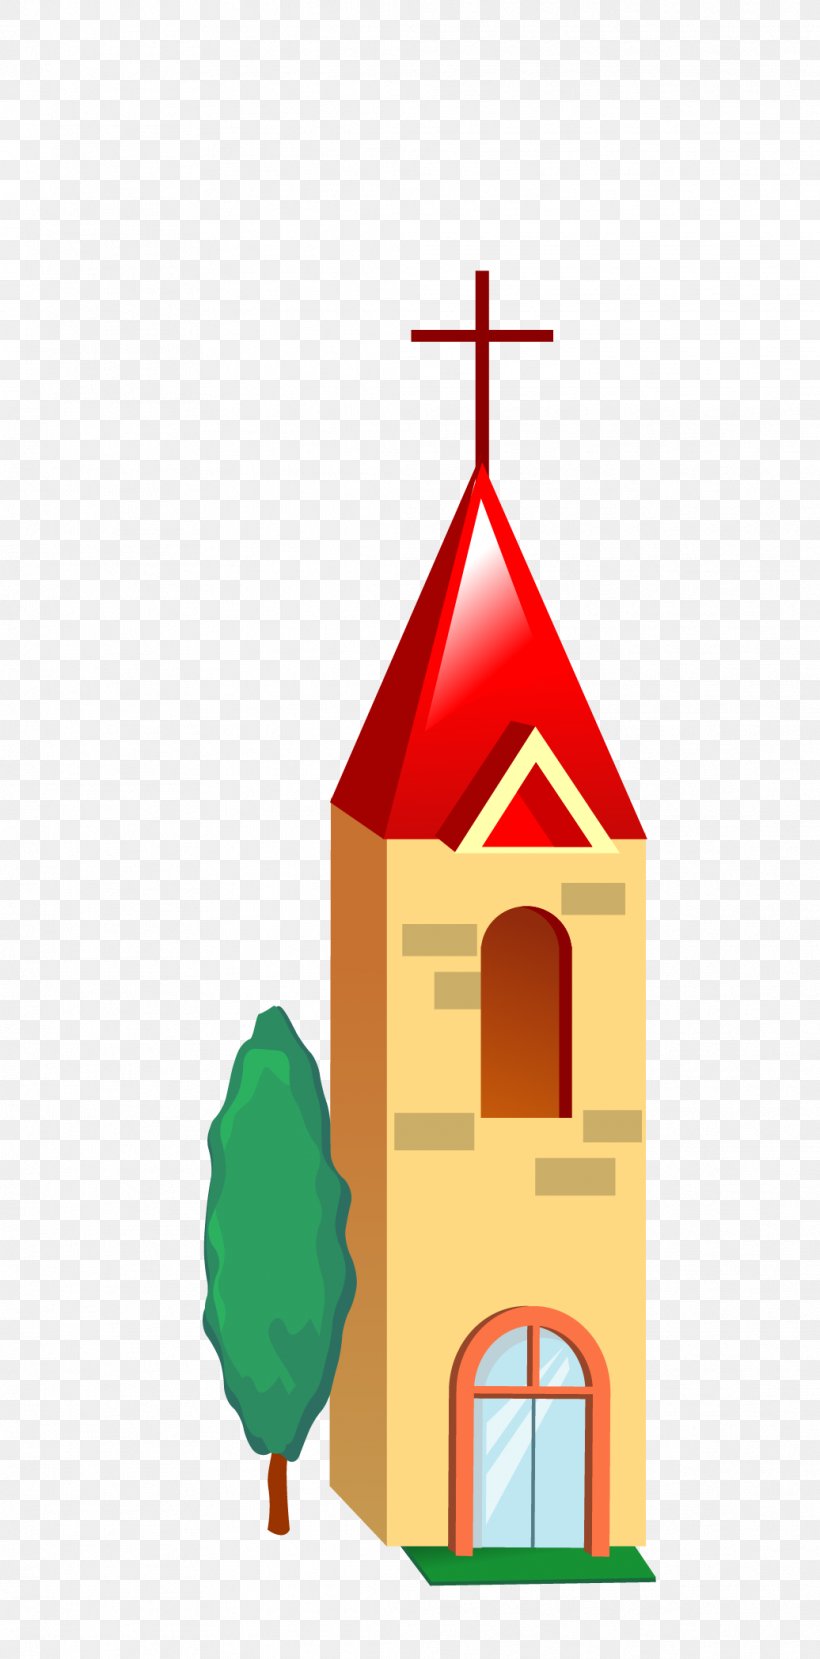 Royalty-free Building Illustration, PNG, 1036x2097px, Royaltyfree, Architecture, Building, Church, Facade Download Free